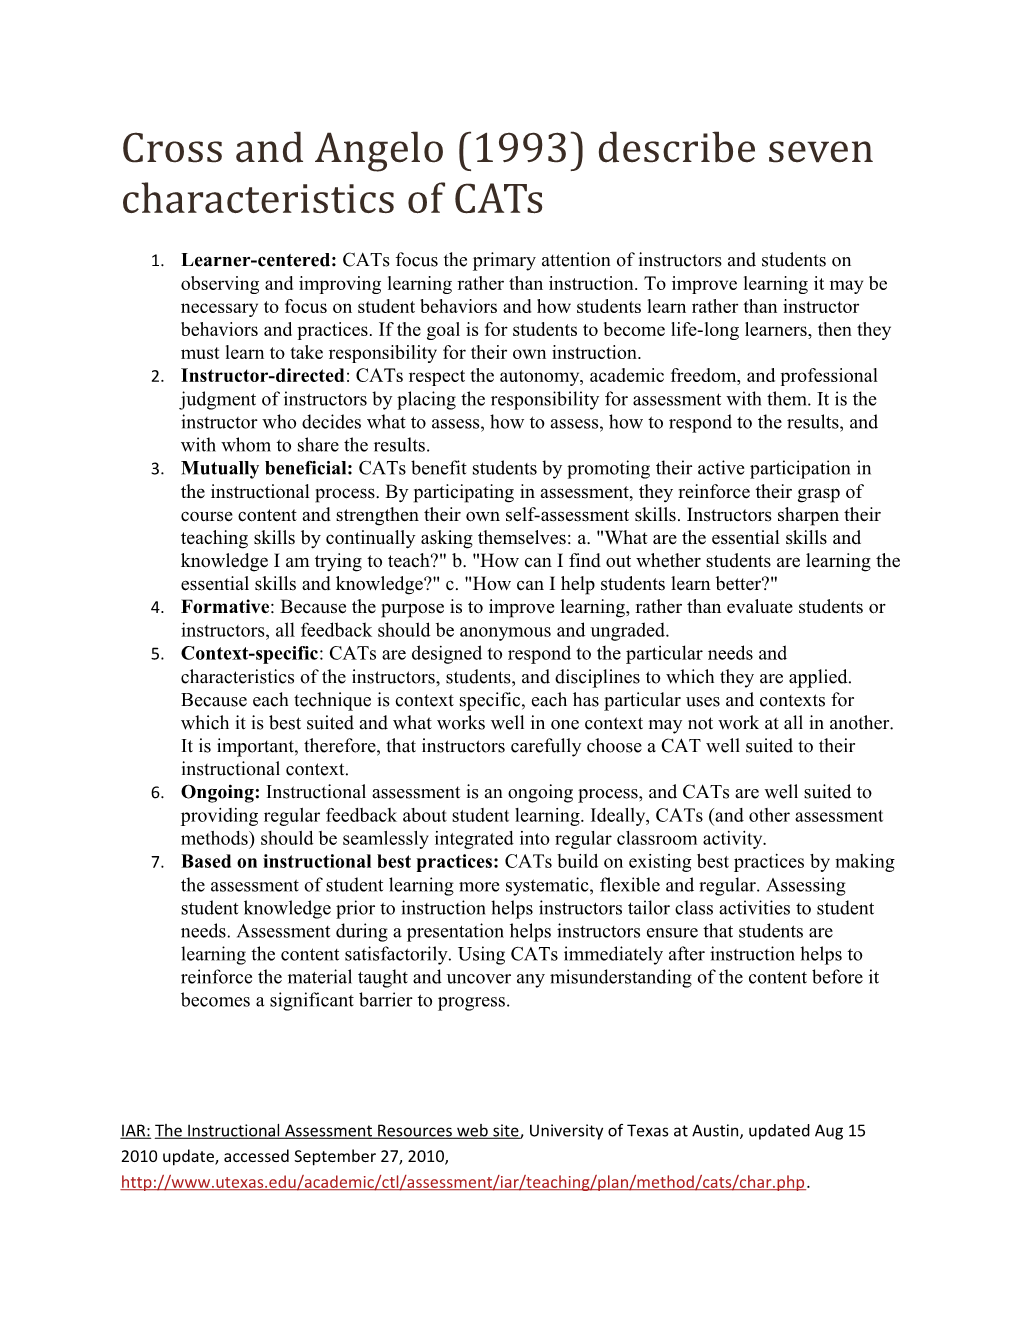 Cross and Angelo (1993) Describe Seven Characteristics of Cats